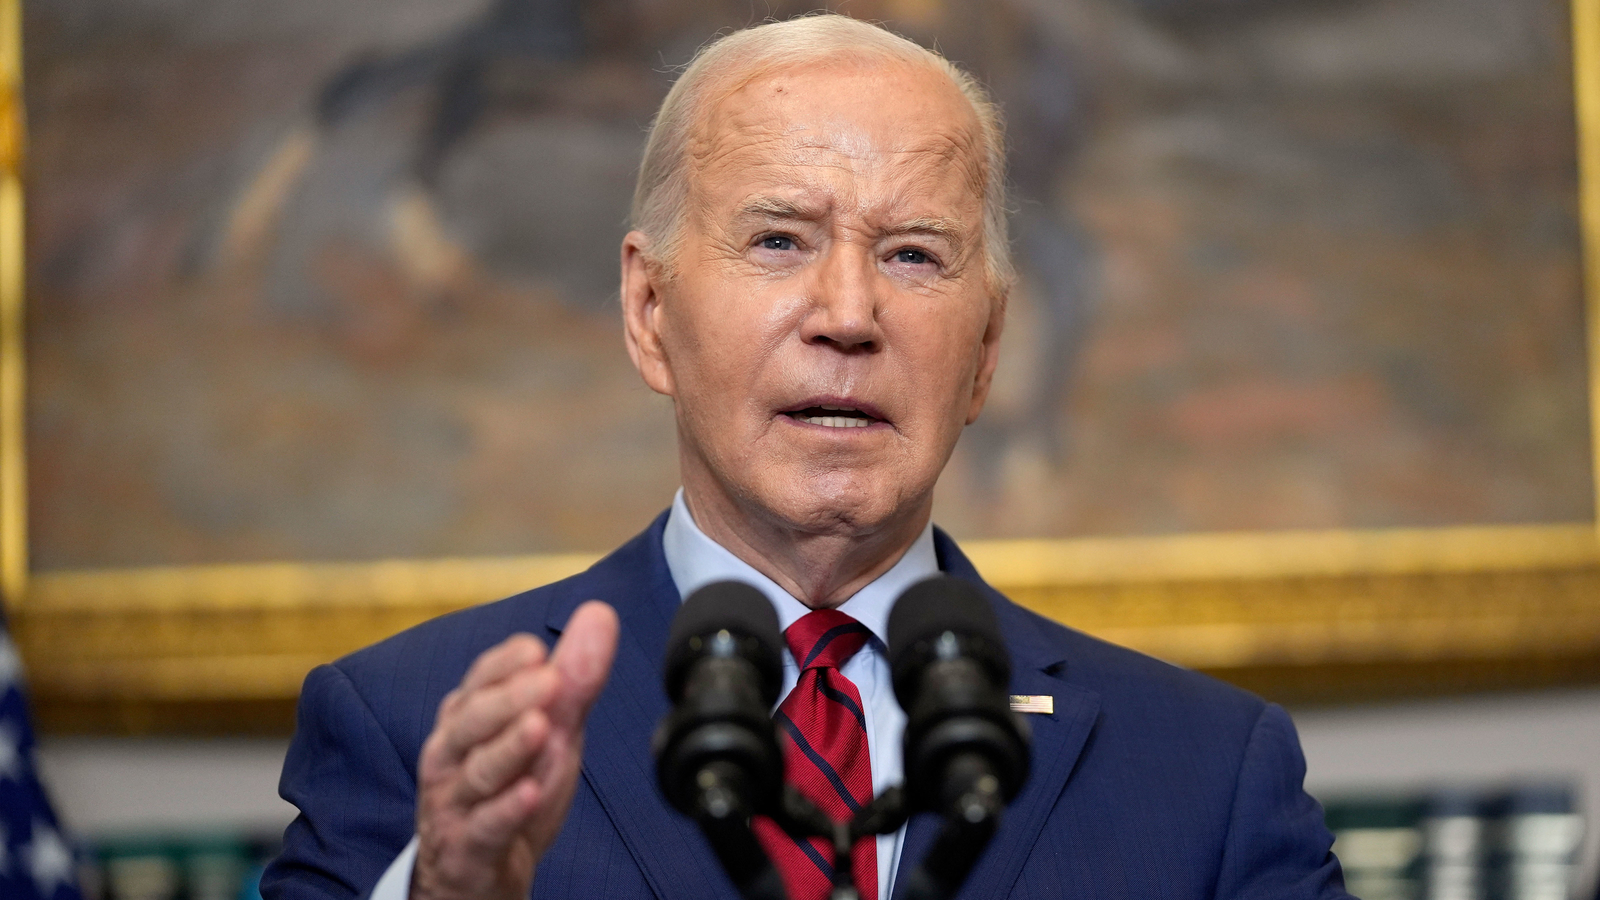 President Biden says ‘order must prevail’ during protests on college campuses over the war in Gaza [Video]